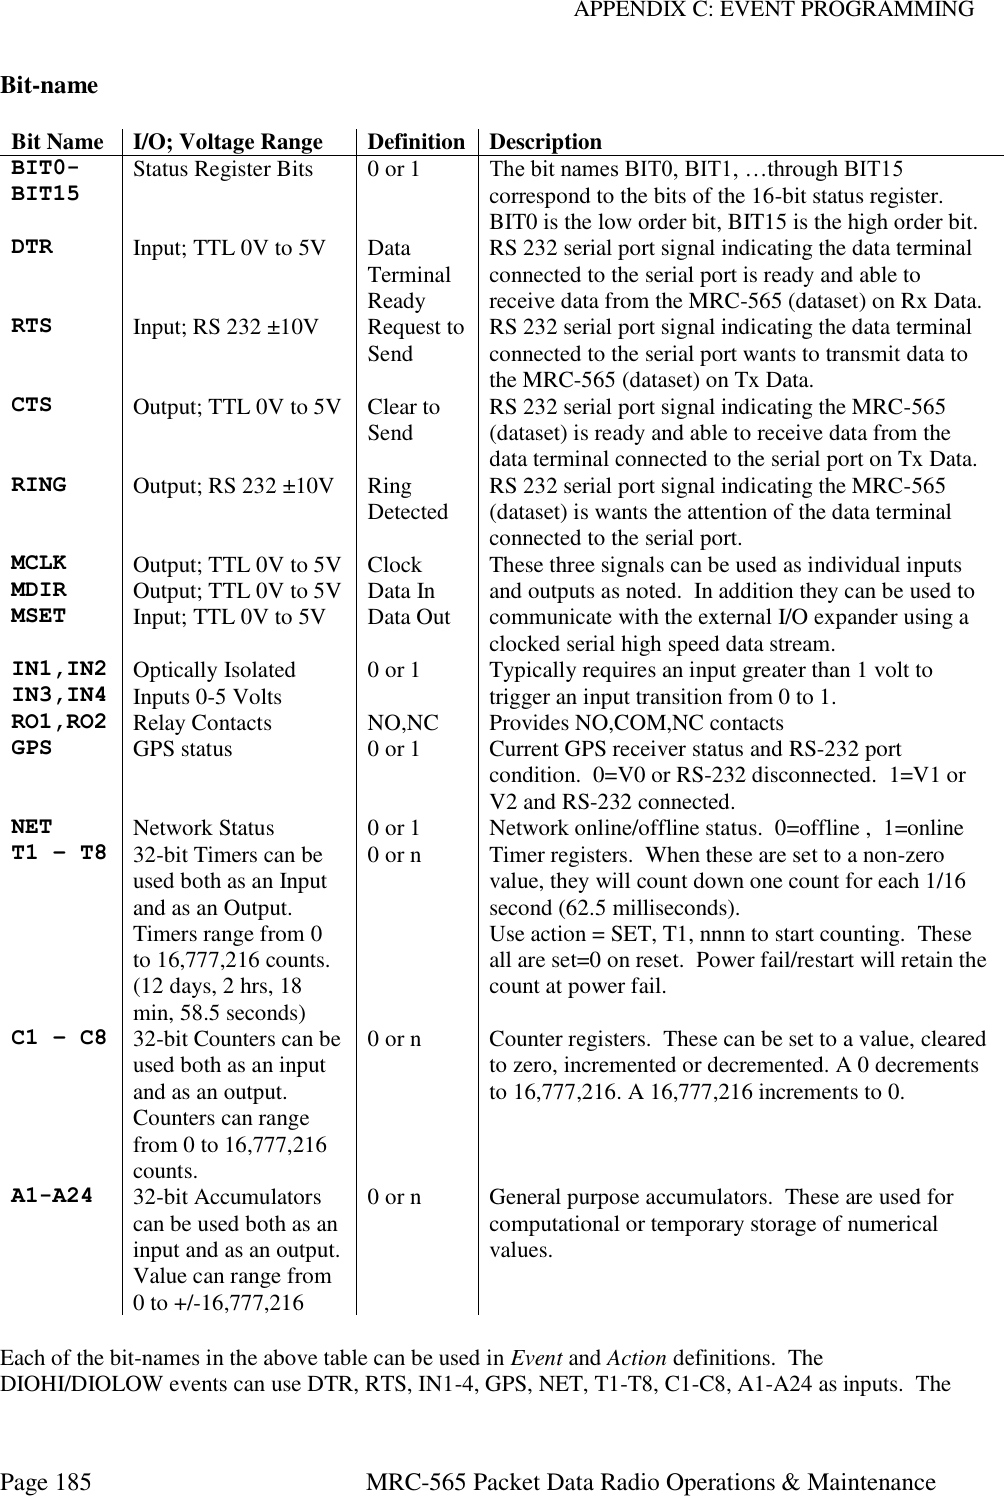 APPENDIX C: EVENT PROGRAMMING Page 185  MRC-565 Packet Data Radio Operations &amp; Maintenance Bit-name  Bit Name I/O; Voltage Range Definition Description BIT0- BIT15 Status Register Bits 0 or 1 The bit names BIT0, BIT1, …through BIT15 correspond to the bits of the 16-bit status register. BIT0 is the low order bit, BIT15 is the high order bit. DTR Input; TTL 0V to 5V Data Terminal Ready RS 232 serial port signal indicating the data terminal connected to the serial port is ready and able to receive data from the MRC-565 (dataset) on Rx Data. RTS Input; RS 232 ±10V Request to Send RS 232 serial port signal indicating the data terminal connected to the serial port wants to transmit data to the MRC-565 (dataset) on Tx Data. CTS Output; TTL 0V to 5V Clear to Send RS 232 serial port signal indicating the MRC-565 (dataset) is ready and able to receive data from the data terminal connected to the serial port on Tx Data. RING Output; RS 232 ±10V Ring Detected RS 232 serial port signal indicating the MRC-565 (dataset) is wants the attention of the data terminal connected to the serial port. MCLK Output; TTL 0V to 5V Clock These three signals can be used as individual inputs and outputs as noted.  In addition they can be used to communicate with the external I/O expander using a clocked serial high speed data stream. MDIR Output; TTL 0V to 5V Data In MSET Input; TTL 0V to 5V Data Out IN1,IN2 IN3,IN4 Optically Isolated Inputs 0-5 Volts 0 or 1 Typically requires an input greater than 1 volt to trigger an input transition from 0 to 1. RO1,RO2 Relay Contacts NO,NC Provides NO,COM,NC contacts GPS GPS status 0 or 1 Current GPS receiver status and RS-232 port condition.  0=V0 or RS-232 disconnected.  1=V1 or V2 and RS-232 connected. NET Network Status 0 or 1 Network online/offline status.  0=offline ,  1=online T1 – T8  32-bit Timers can be used both as an Input and as an Output. Timers range from 0 to 16,777,216 counts. (12 days, 2 hrs, 18 min, 58.5 seconds) 0 or n Timer registers.  When these are set to a non-zero value, they will count down one count for each 1/16 second (62.5 milliseconds).   Use action = SET, T1, nnnn to start counting.  These all are set=0 on reset.  Power fail/restart will retain the count at power fail. C1 – C8 32-bit Counters can be used both as an input and as an output.  Counters can range from 0 to 16,777,216 counts. 0 or n Counter registers.  These can be set to a value, cleared to zero, incremented or decremented. A 0 decrements to 16,777,216. A 16,777,216 increments to 0. A1-A24 32-bit Accumulators can be used both as an input and as an output.  Value can range from 0 to +/-16,777,216  0 or n General purpose accumulators.  These are used for computational or temporary storage of numerical values.  Each of the bit-names in the above table can be used in Event and Action definitions.  The DIOHI/DIOLOW events can use DTR, RTS, IN1-4, GPS, NET, T1-T8, C1-C8, A1-A24 as inputs.  The 